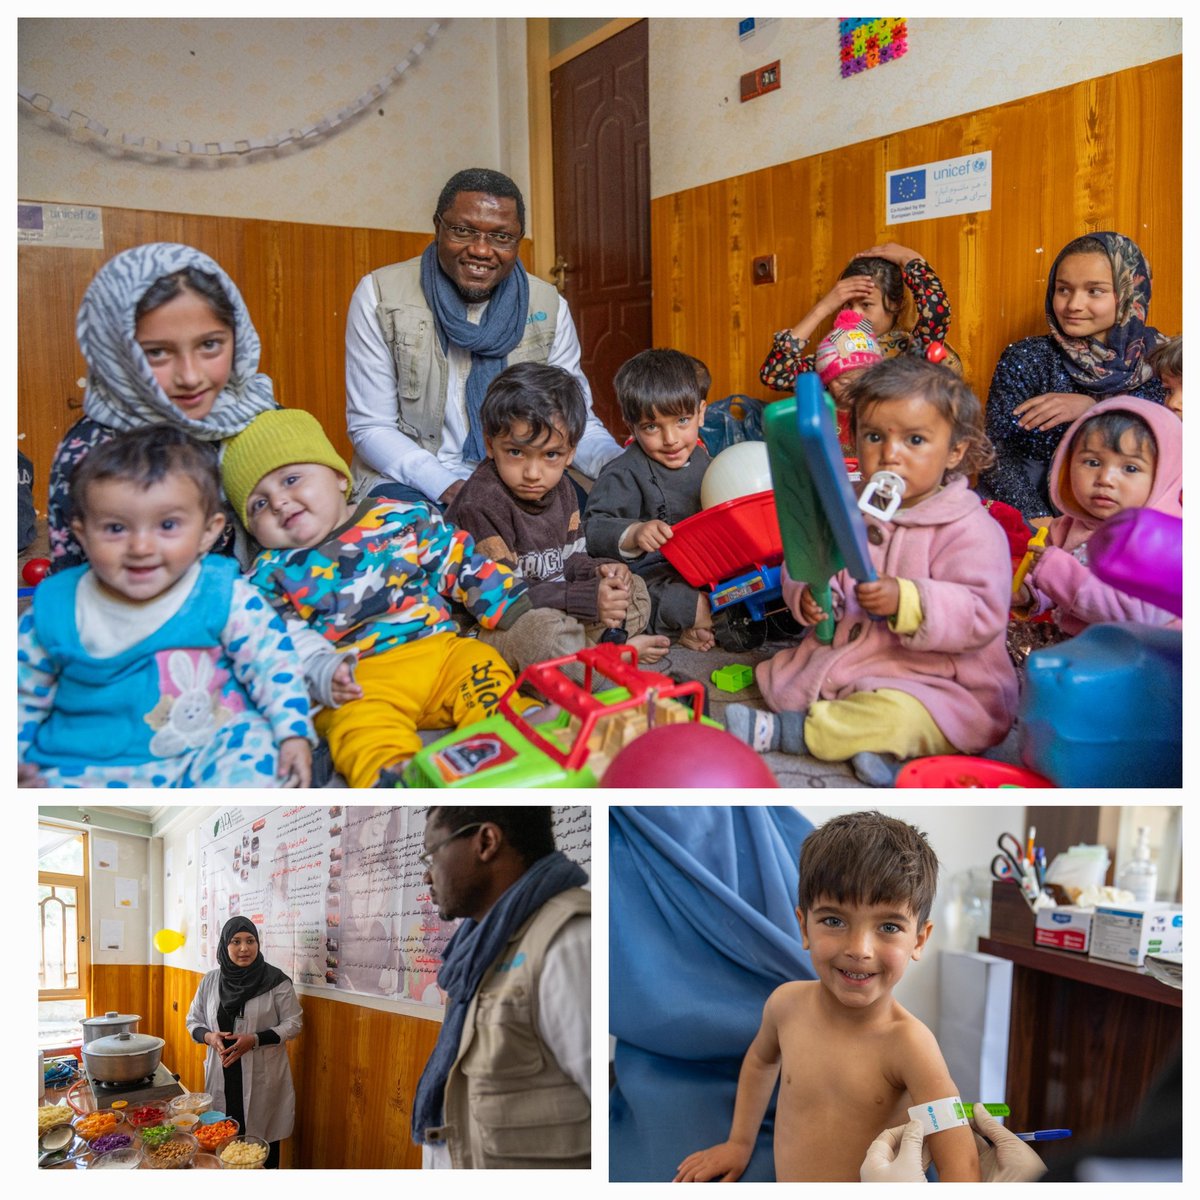 Today, I visited one of 50 daycare centres in Kabul supported by @UNICEFAfg & @EUinAfghanistan. The center offer nutrition counselling, treatment of malnutrition & cooking demonstration; playroom for #children and a chance for mothers to meet. #ForEveryChild, joy.